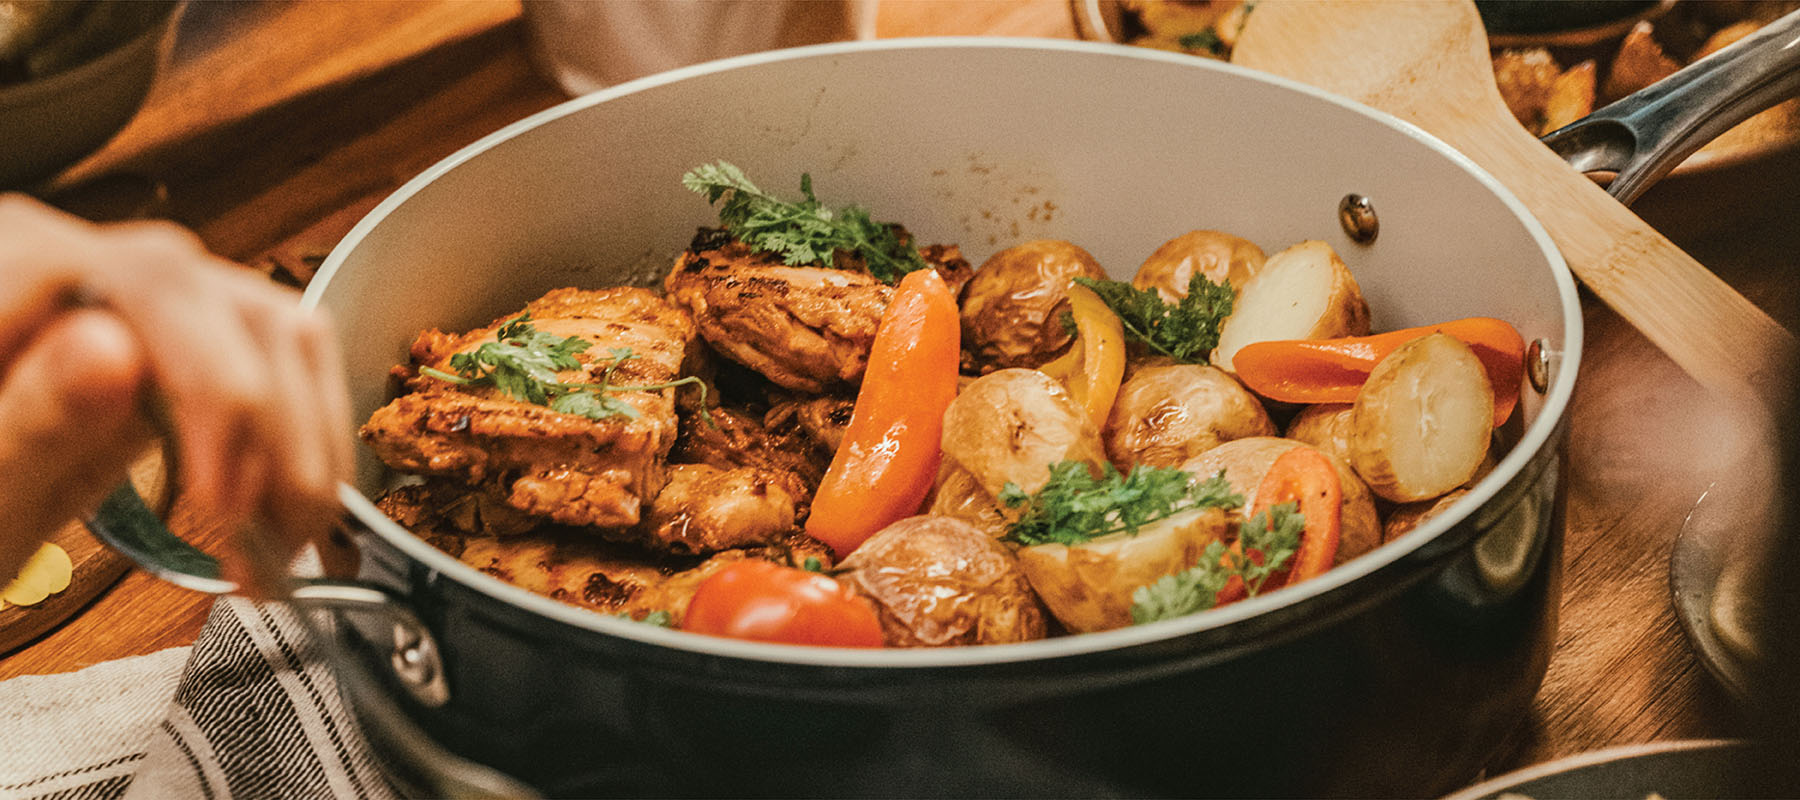 5 reasons why you should use non-stick cookware